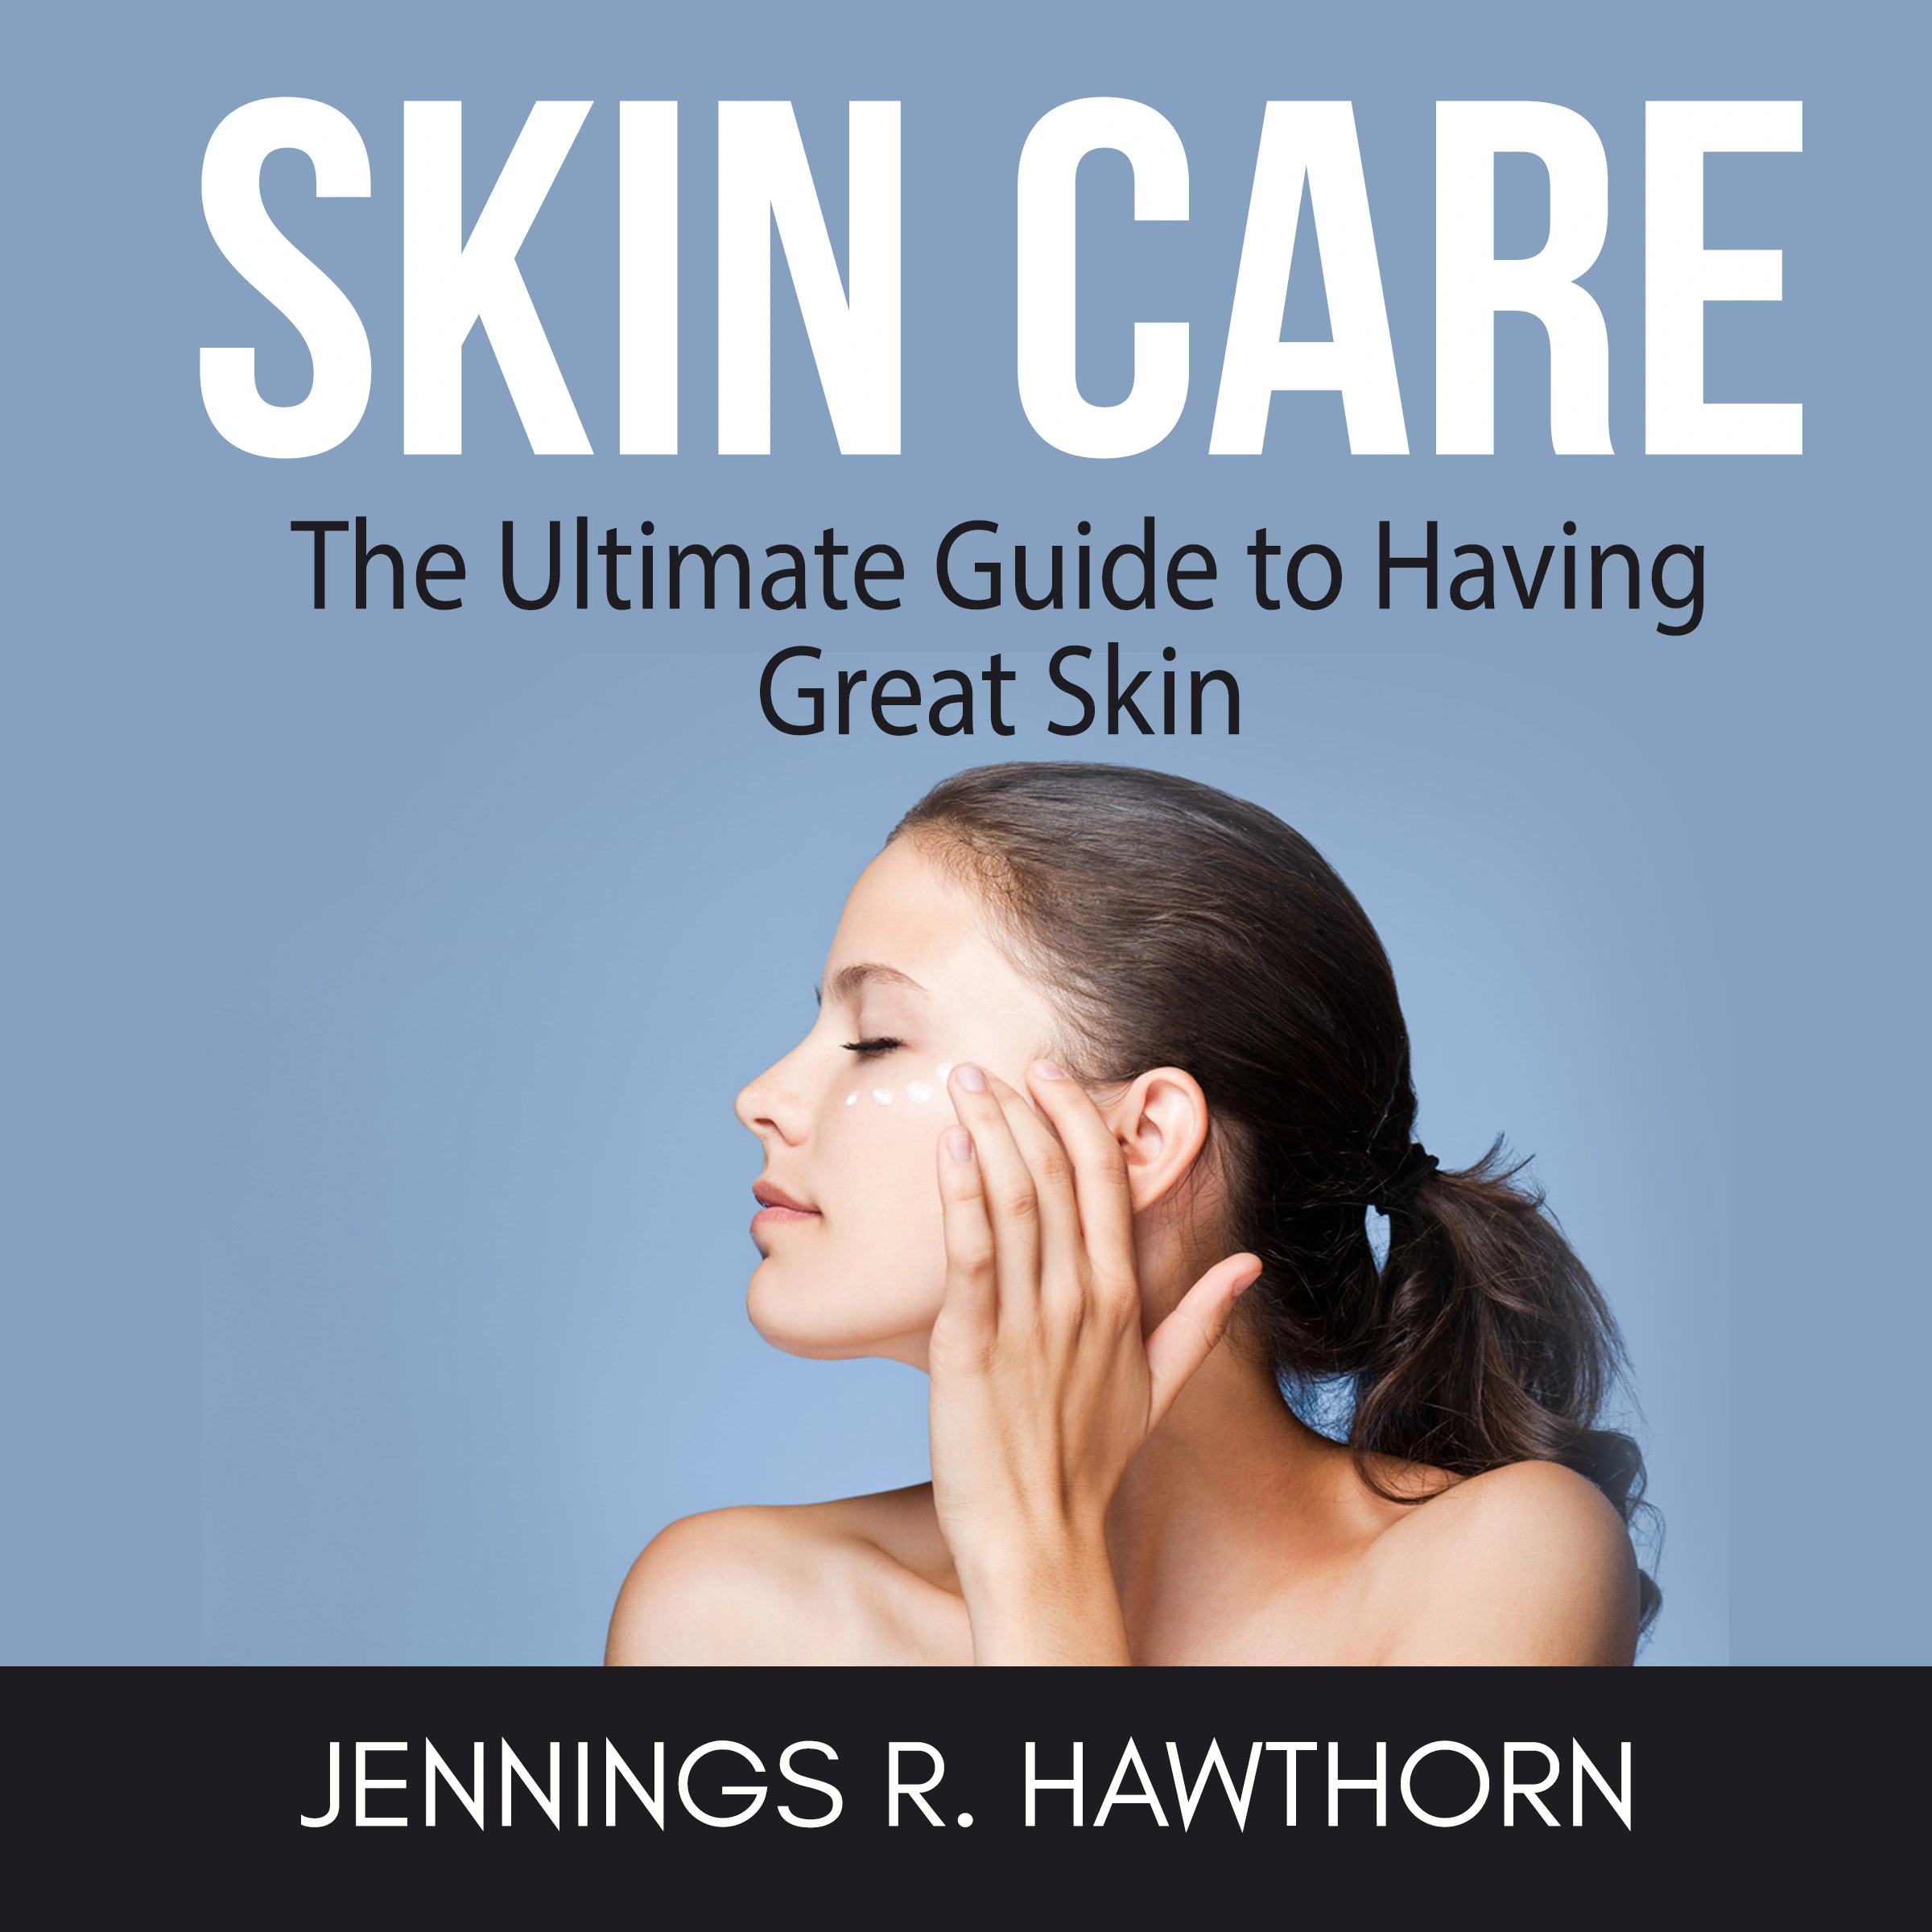 Skin Care: The Ultimate Guide to Having Great Skin Audiobook by Jennings R. Hawthorn